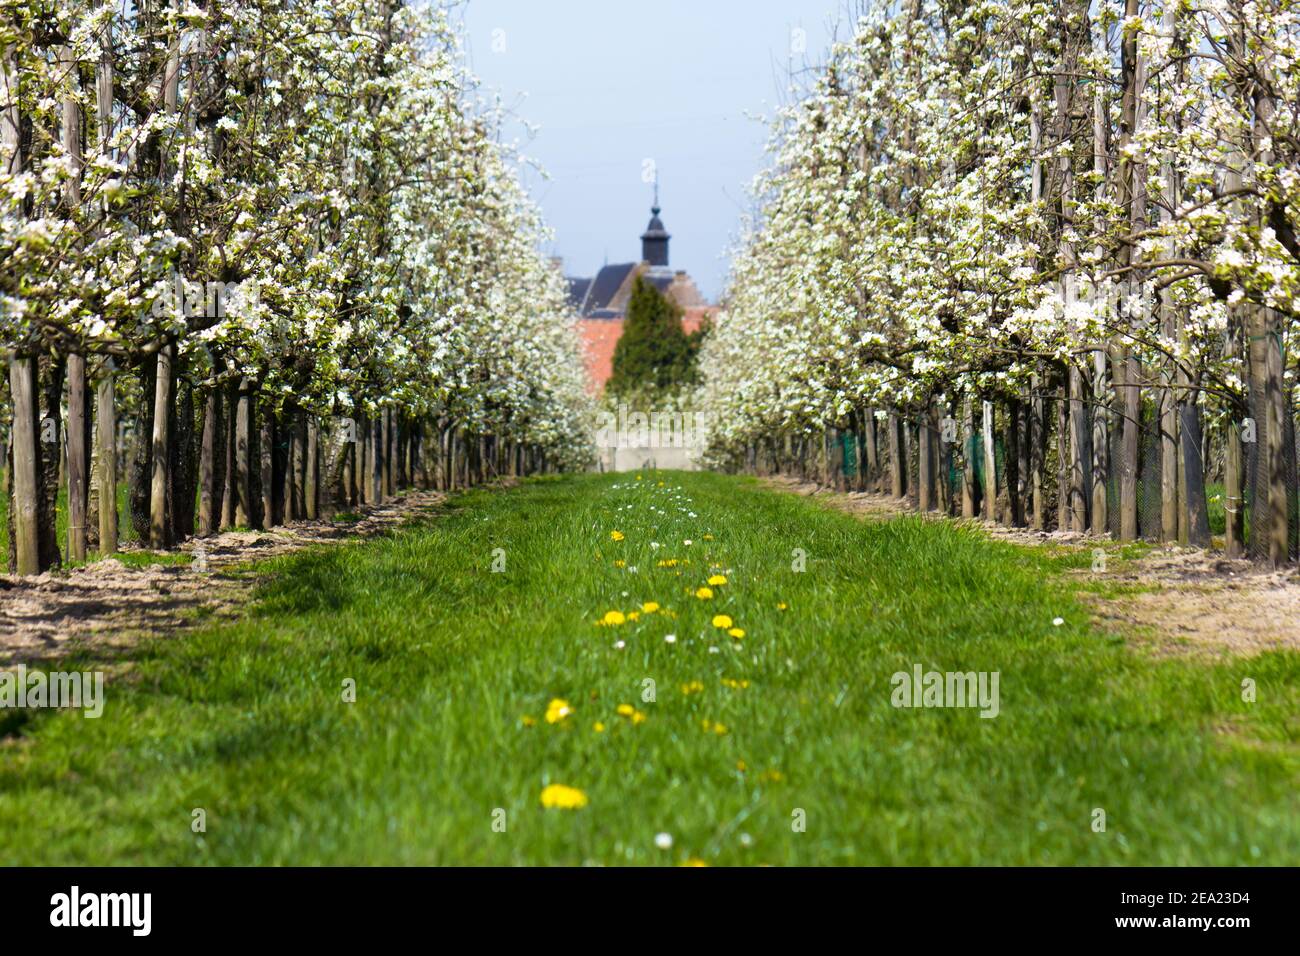 Blooming fruit orchard in springtime with the Castle of Rijkel blurred in the background (Borgloon, Belgium) Stock Photo